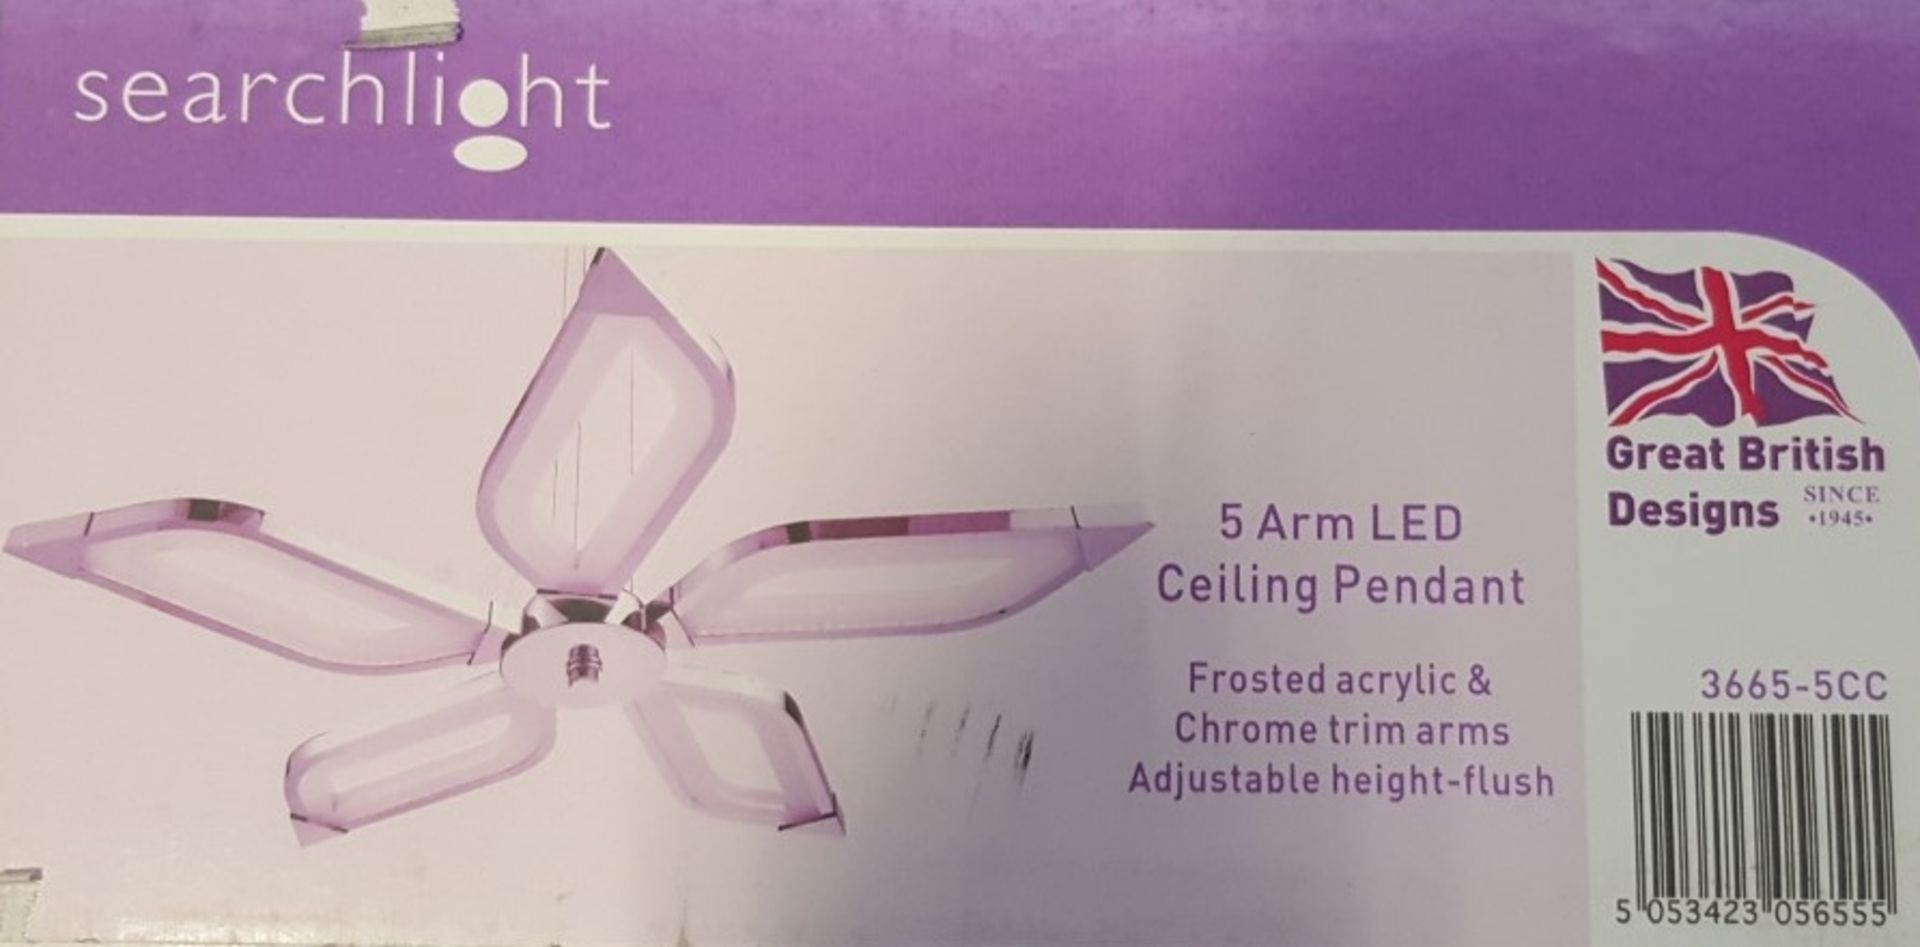 1 x Searchlight 3665-5CC Solexa Modern Ceiling Pendant Light in Chrome - New Boxed Stock - CL323